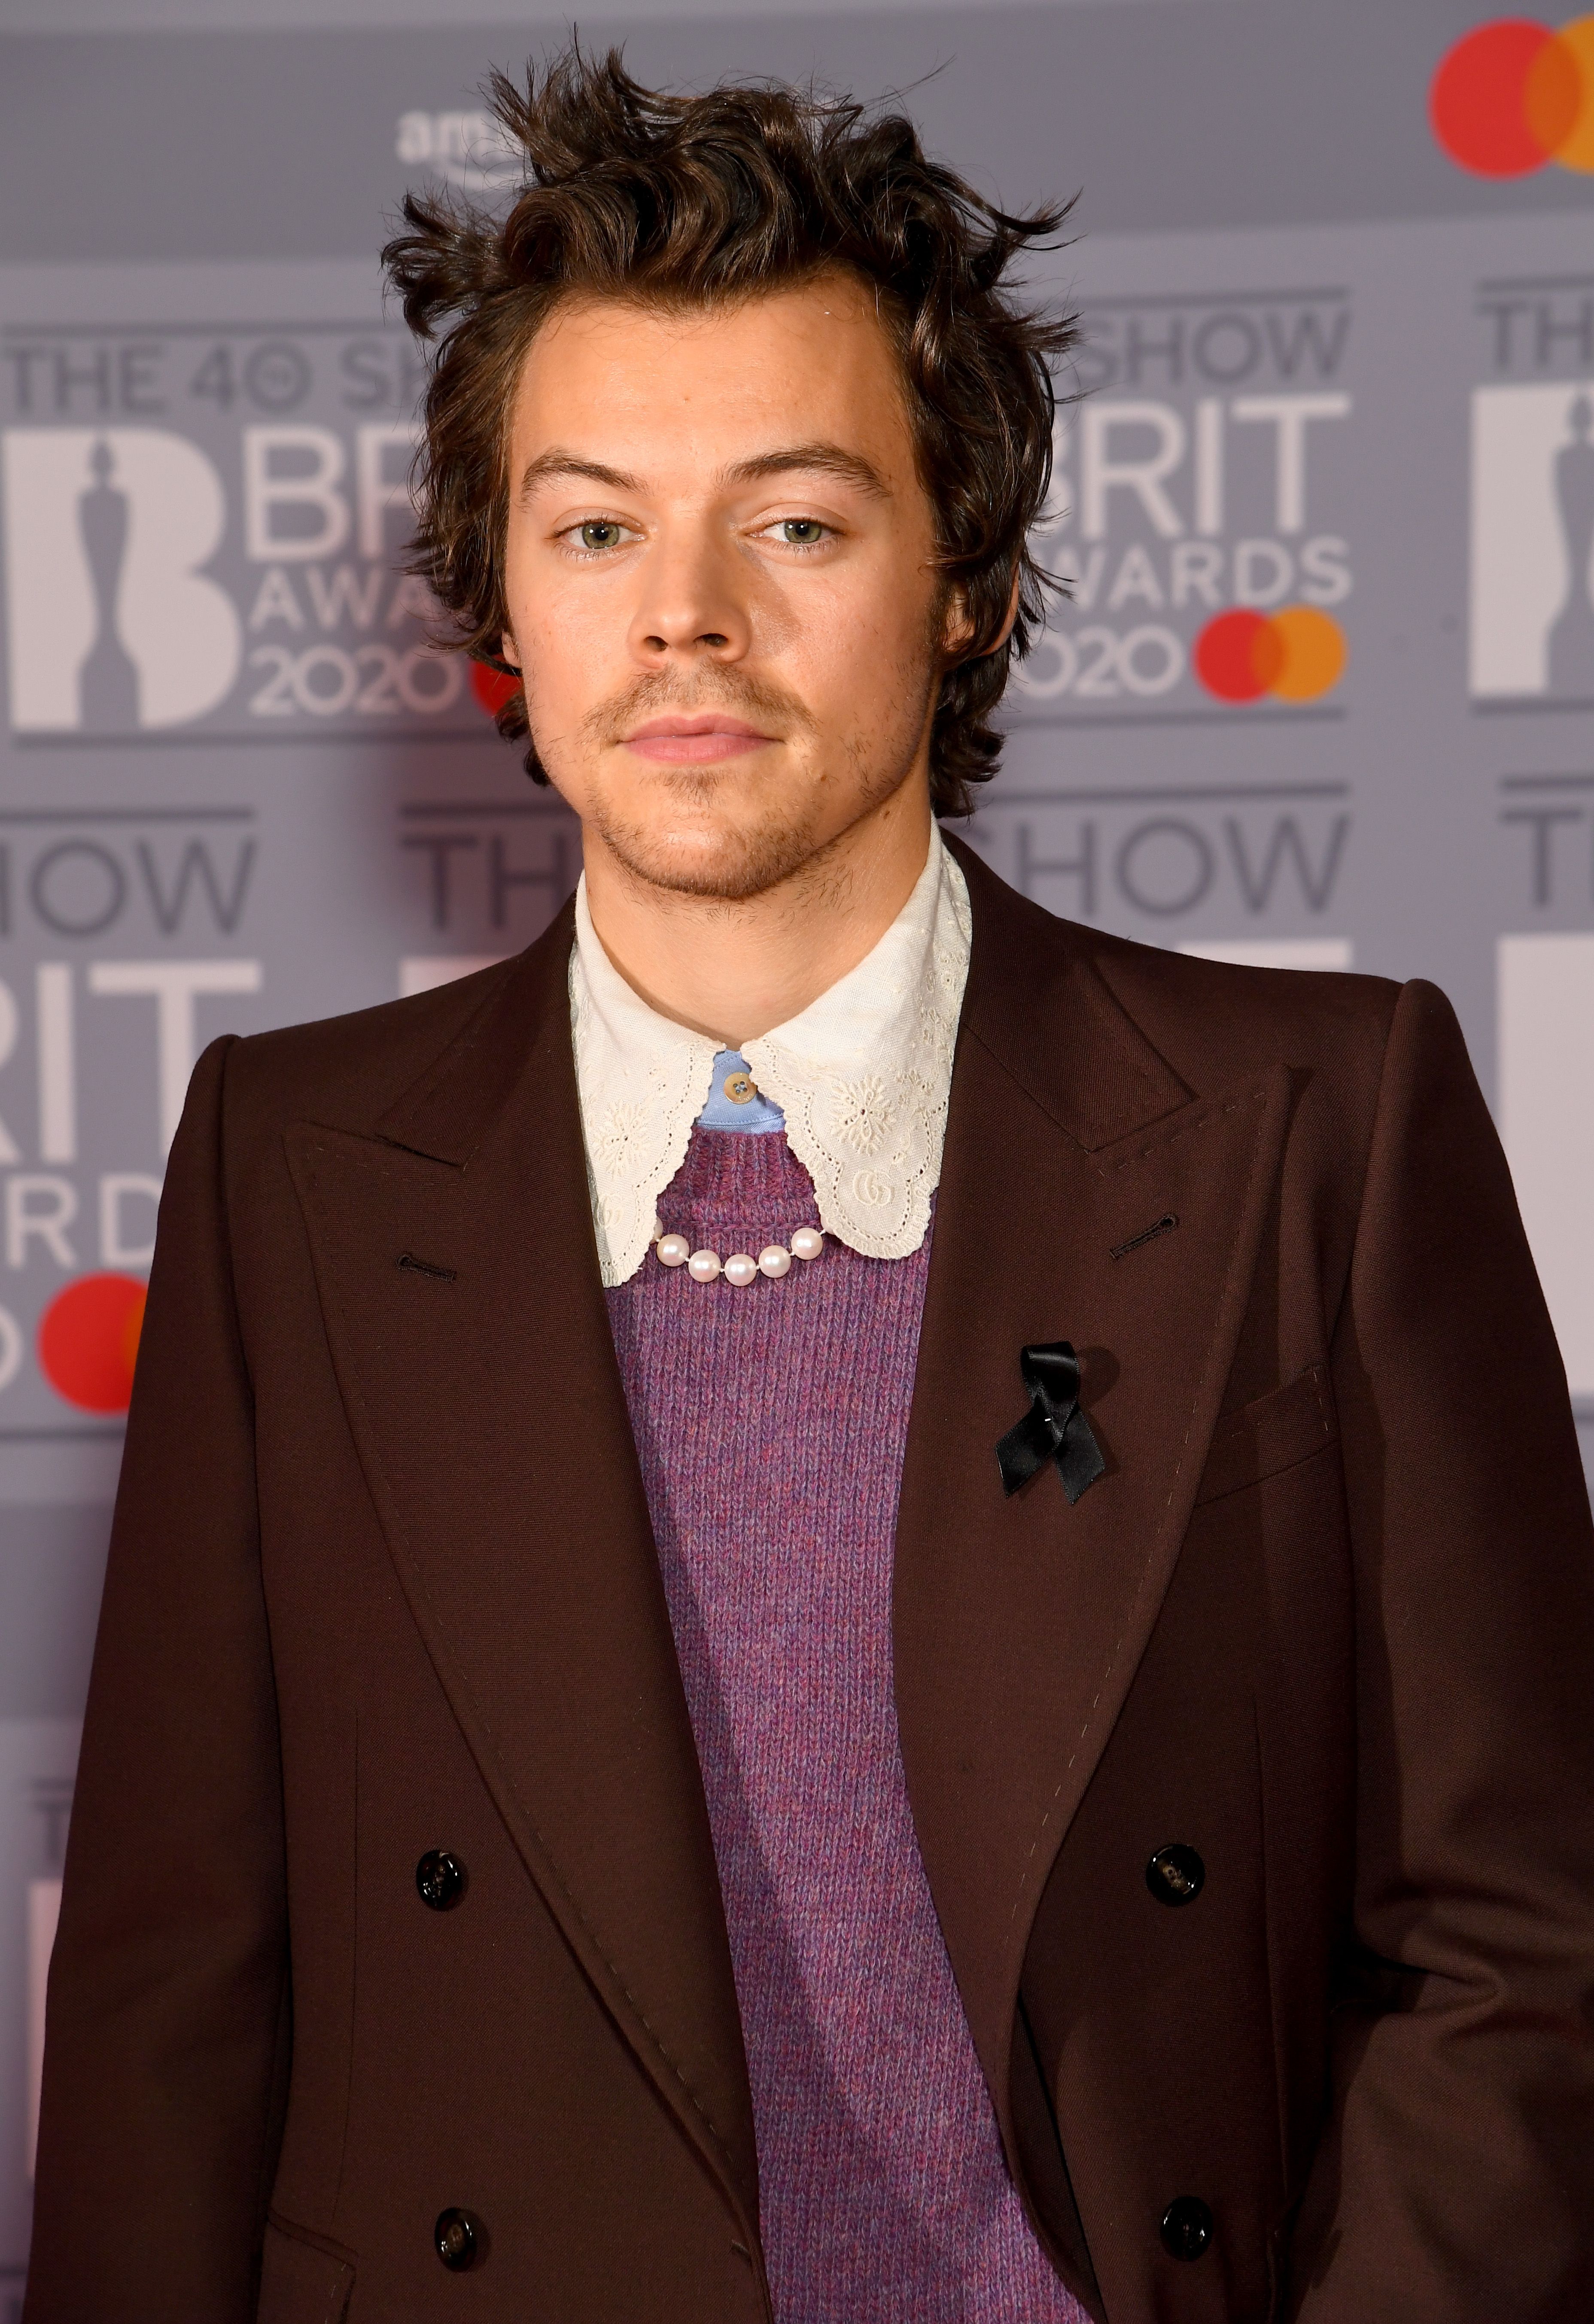 Harry Styles Pays Tribute To Caroline Flack At 2020 Brit Awards